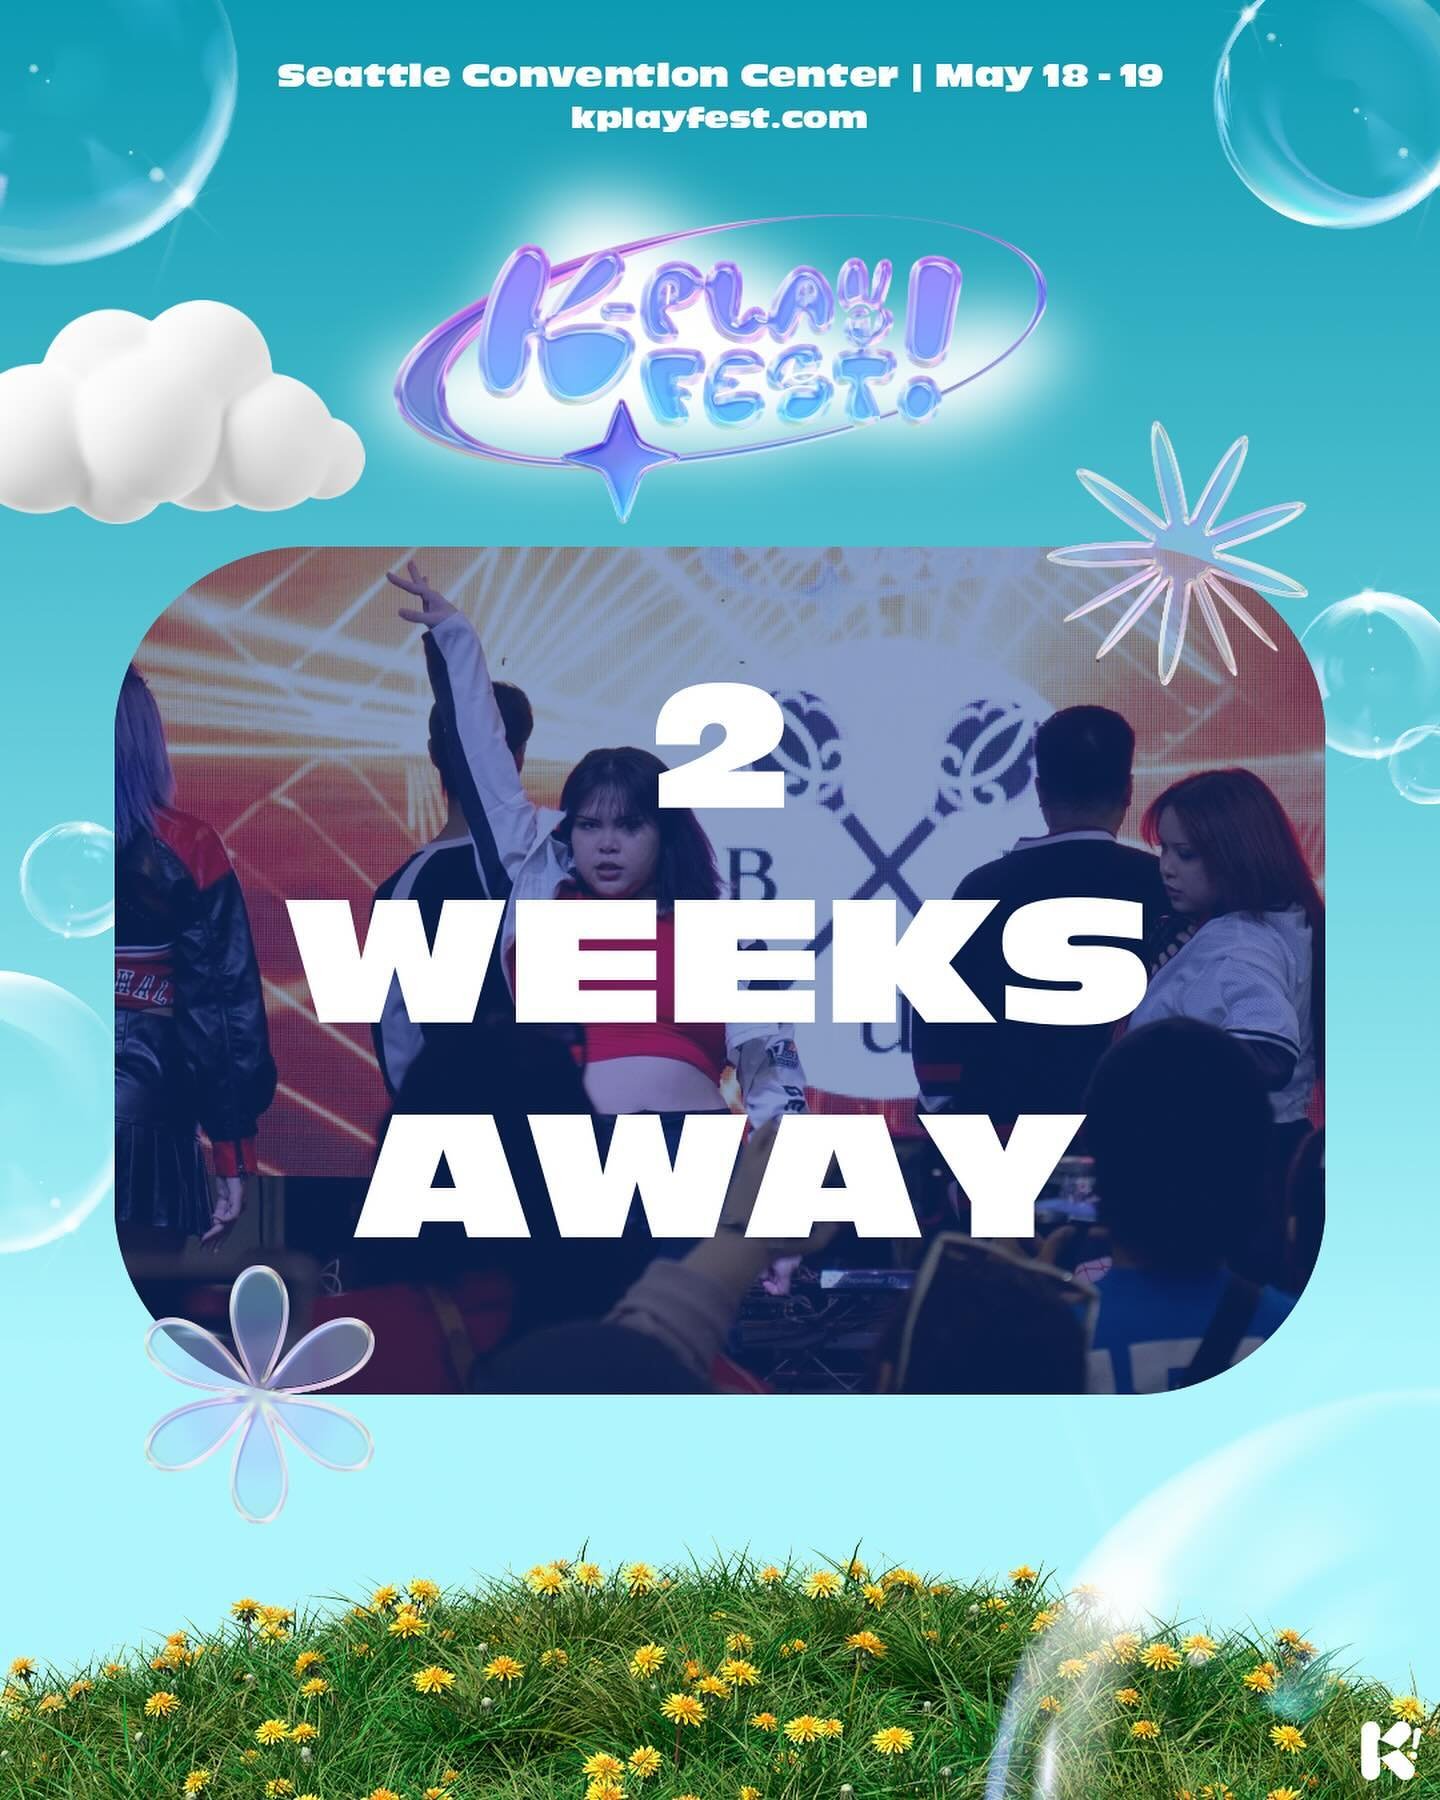 2 WEEKS AWAY? 😱 Time flew by FAST 🦅💨 We can&rsquo;t wait to see all of you at #kplayfestseattle2024 ! 🤩 Get ready for a weekend of shopping 🛍️, dancing 💃🏼, and FUN! 🙈🎟️ Grab your tickets early at kplayfest.com/tickets!

EVENT DETAILS :
📍Sea